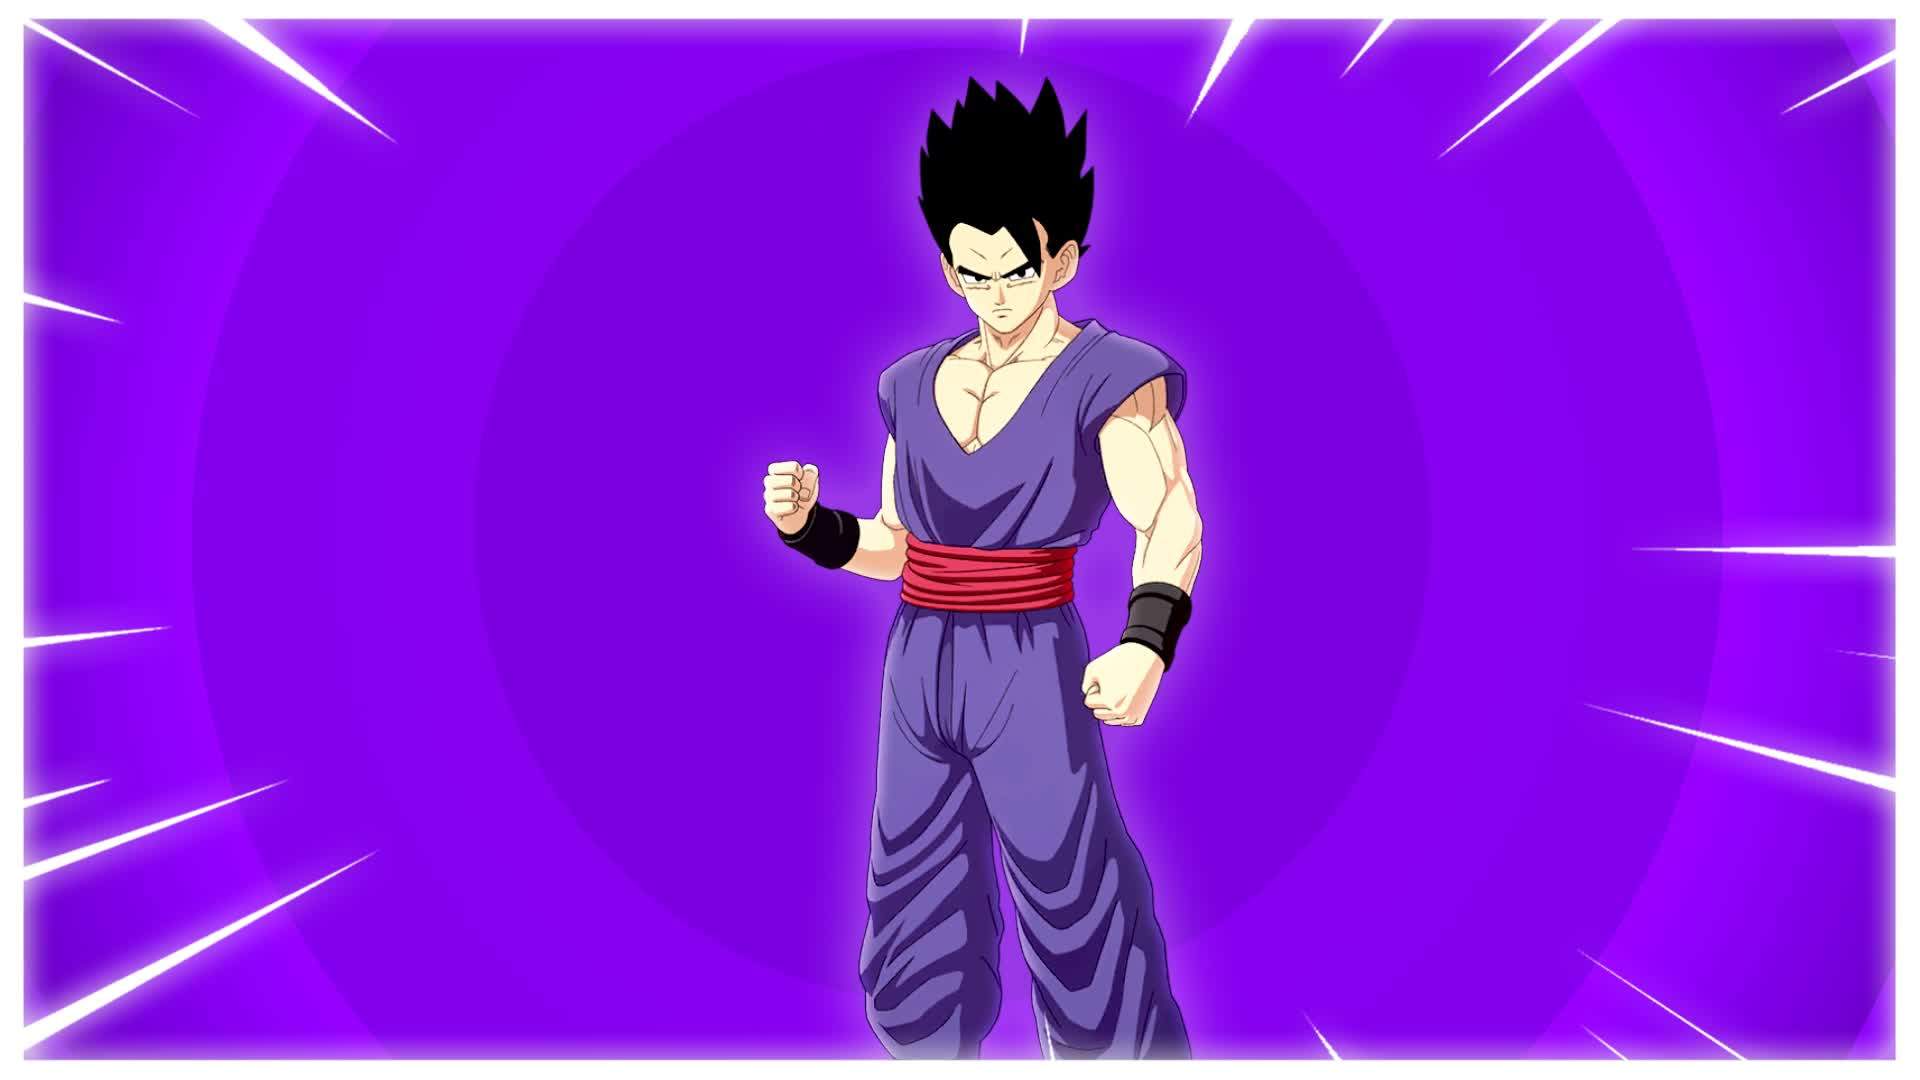 Gohan - FREE FOR ALL